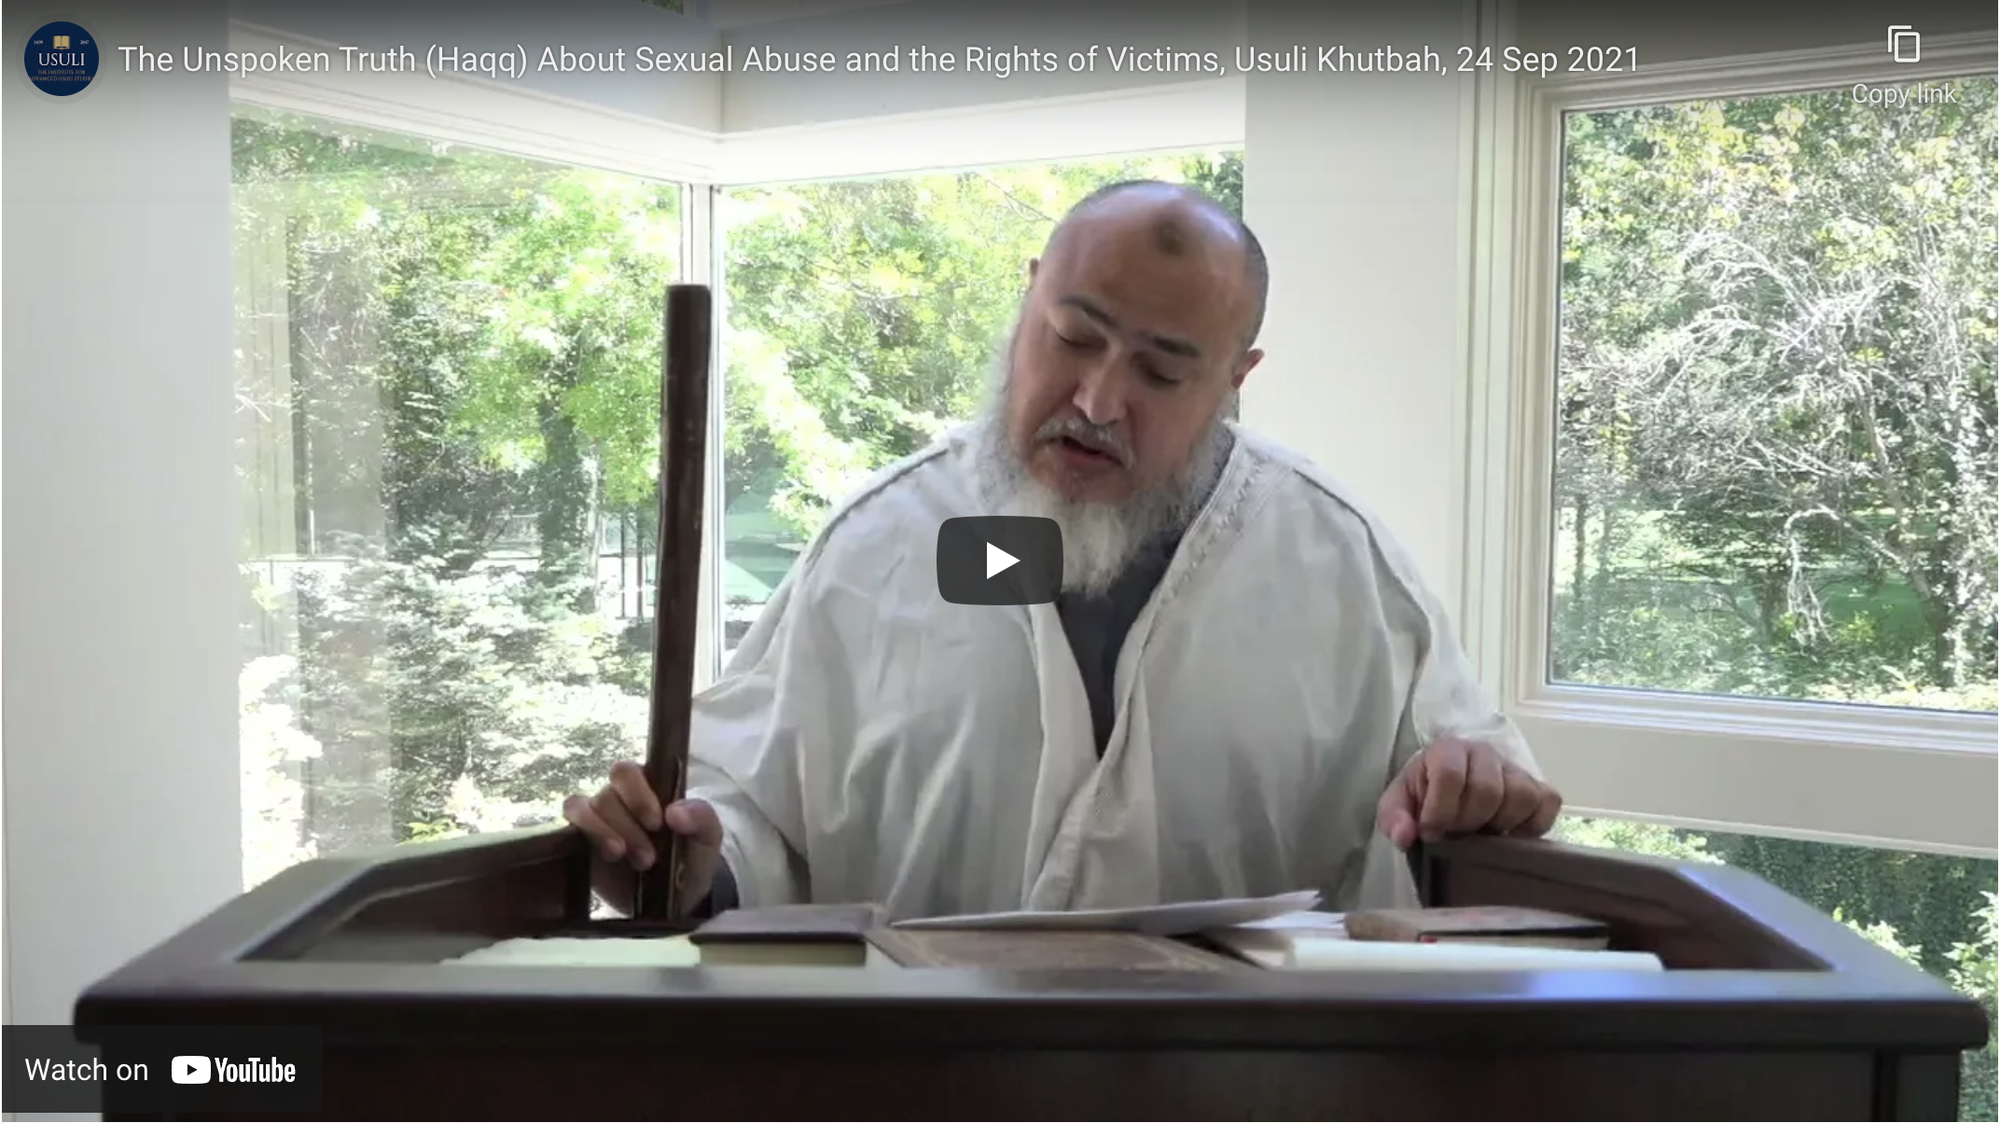 "The Unspoken Truth (Haqq) About Sexual Abuse and the Rights of Victims"